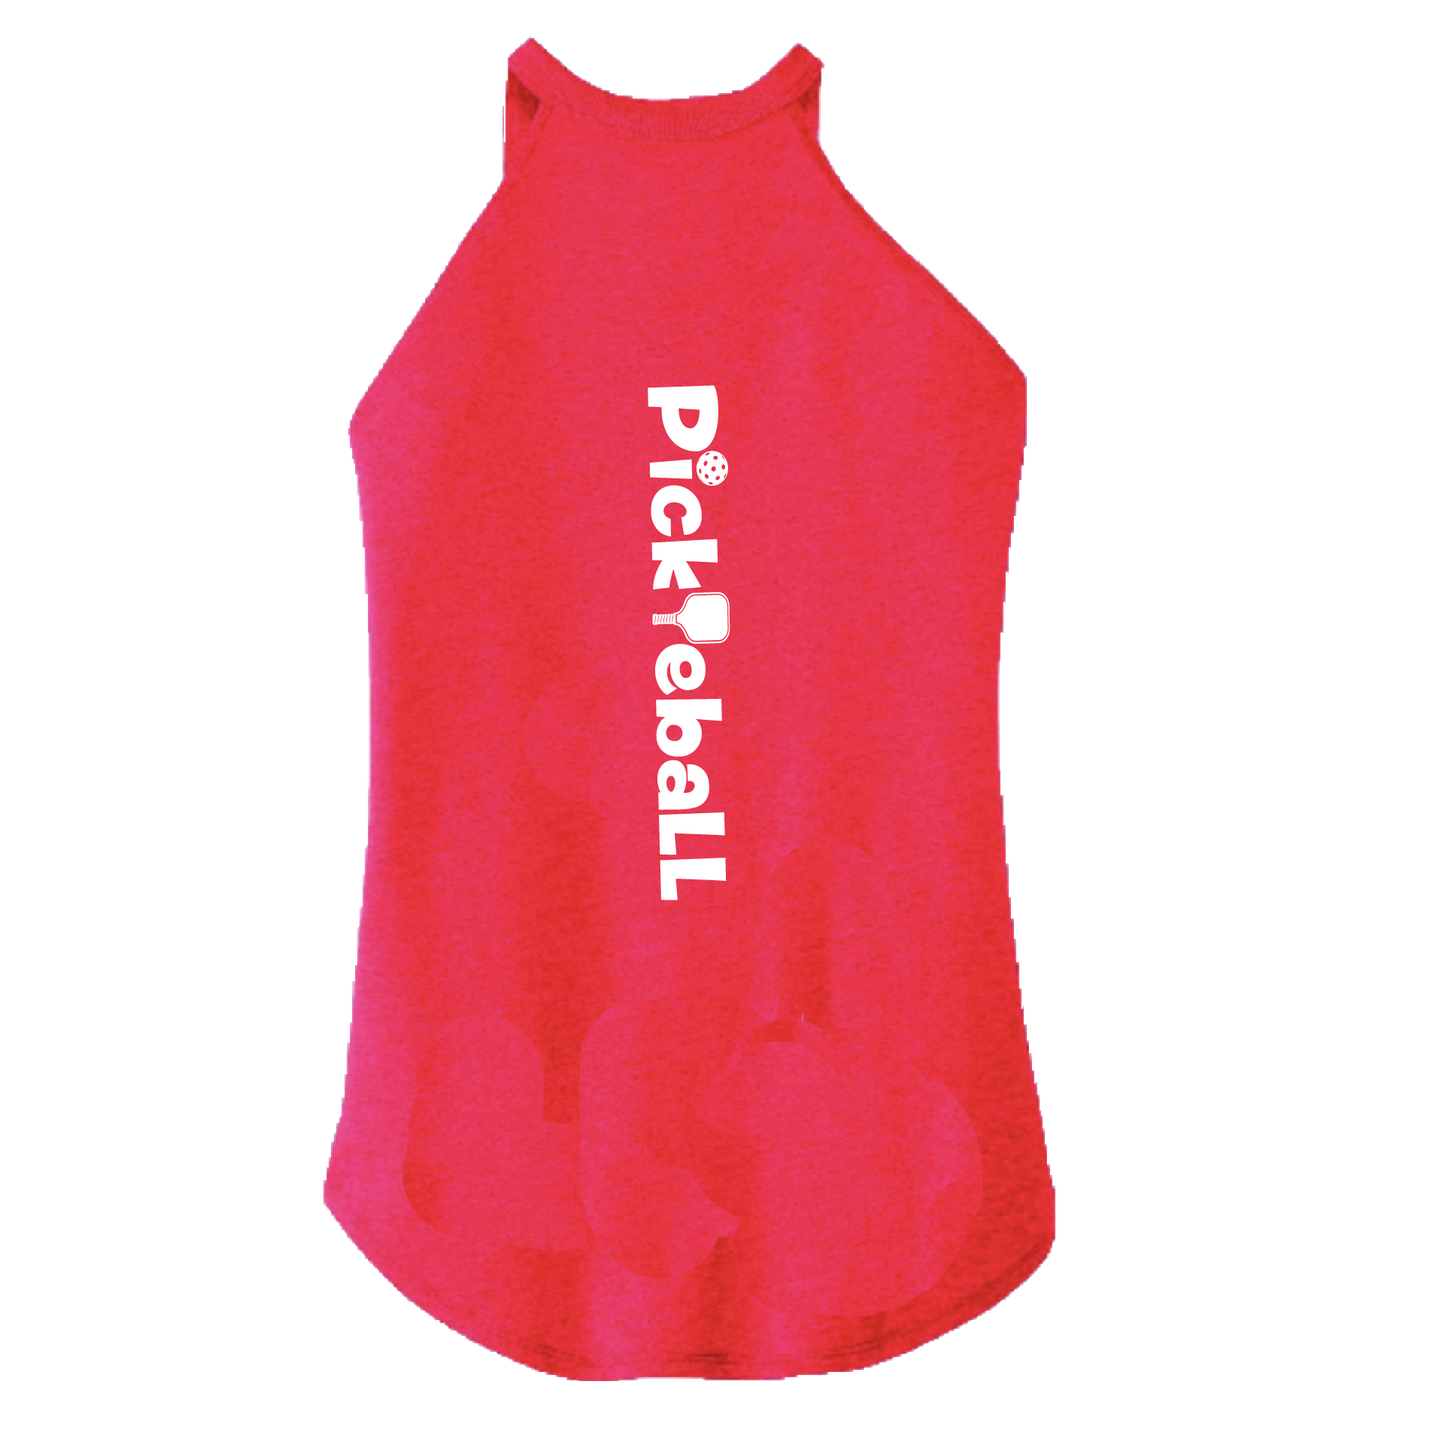 Pickleball Design: Pickleball Vertical down middle of back  Soft and flowing tank top for Women pickleball players everywhere!! Pickleball runs down the back of the tank, and really shows off your love for the game.  Turn up the volume in this tank with its perfect mix of softness and attitude. Tear away label and curved hem brings a uniqueness to this garment. Material is 50/25/25 poly/combed ring spun cotton/rayon.